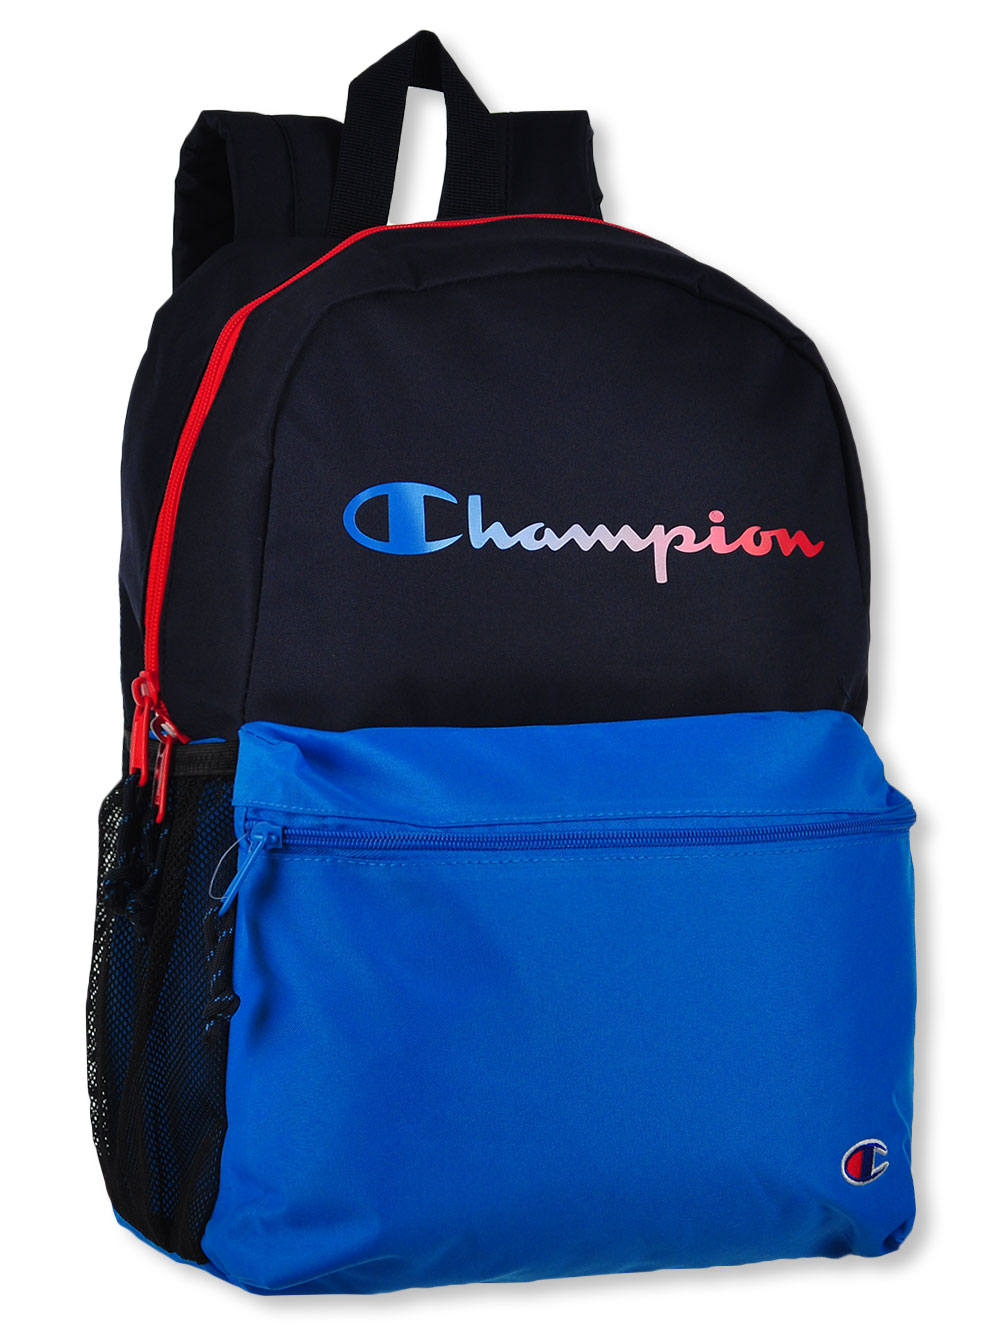 champion backpack 2016